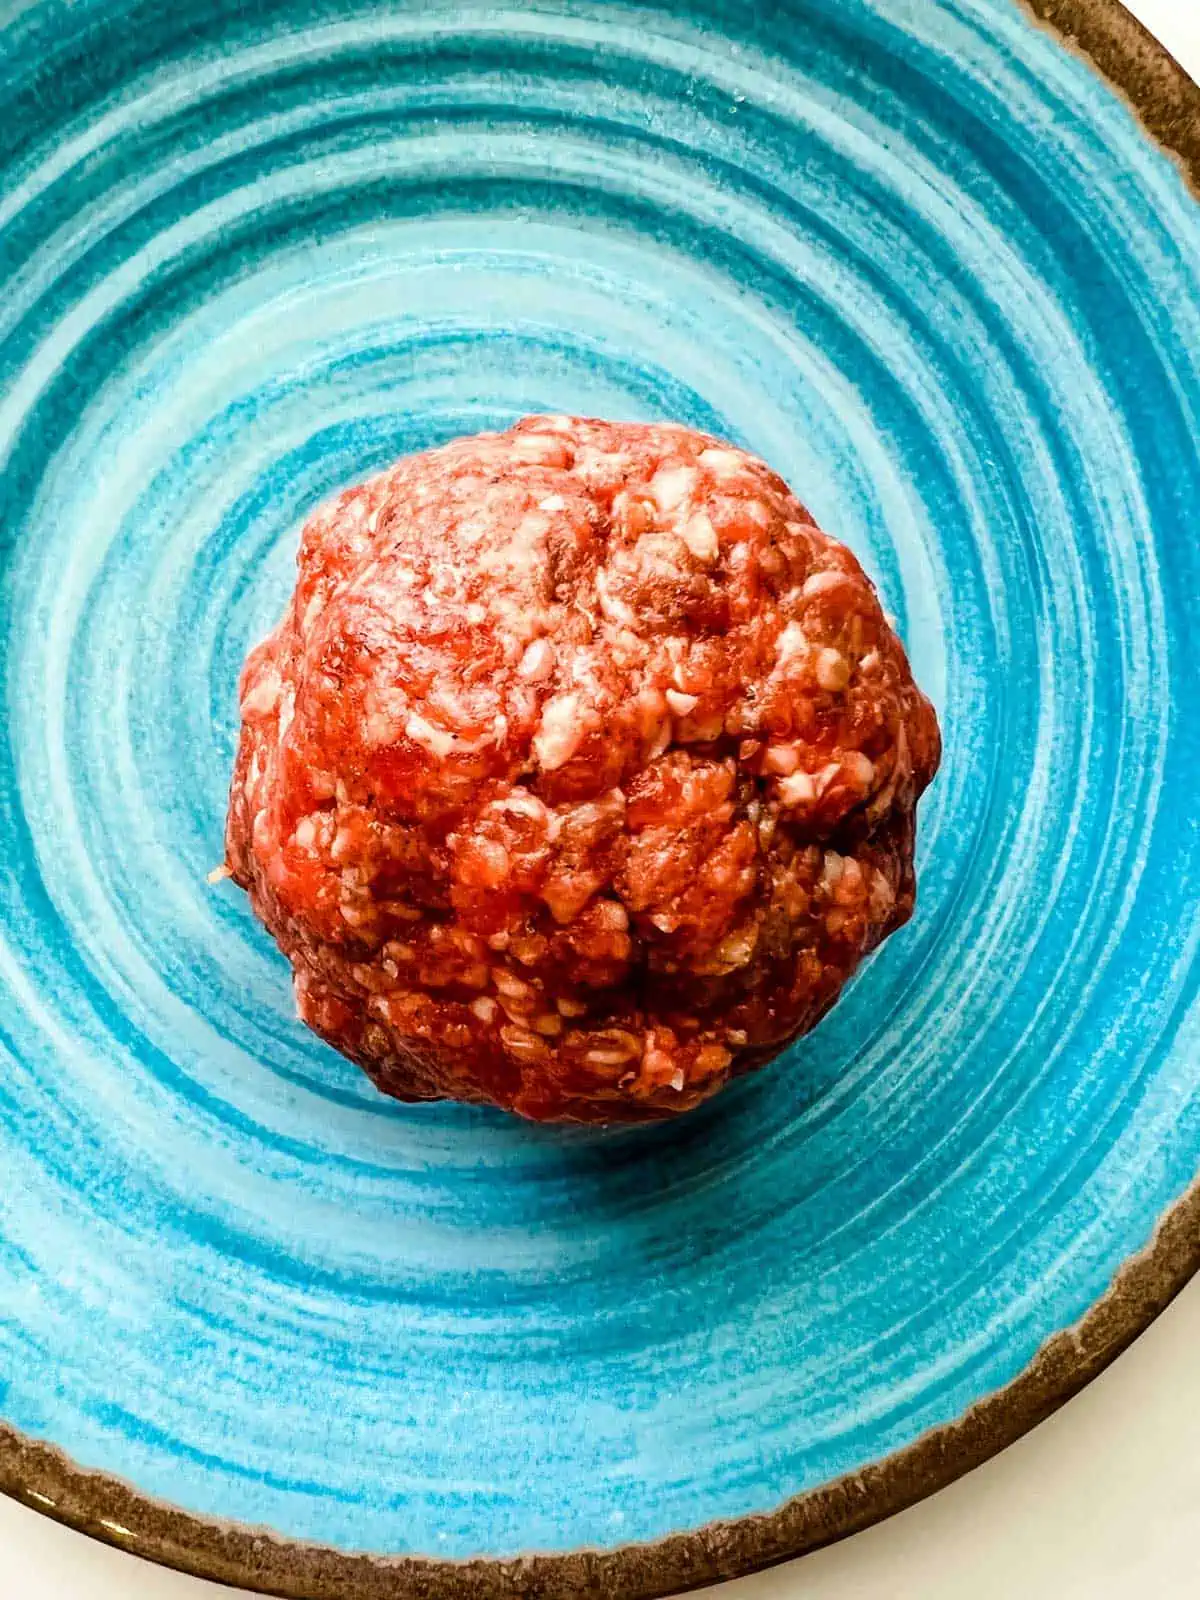 Photo of a ball of of seasoned ground beef to make a burger on a blue plate.